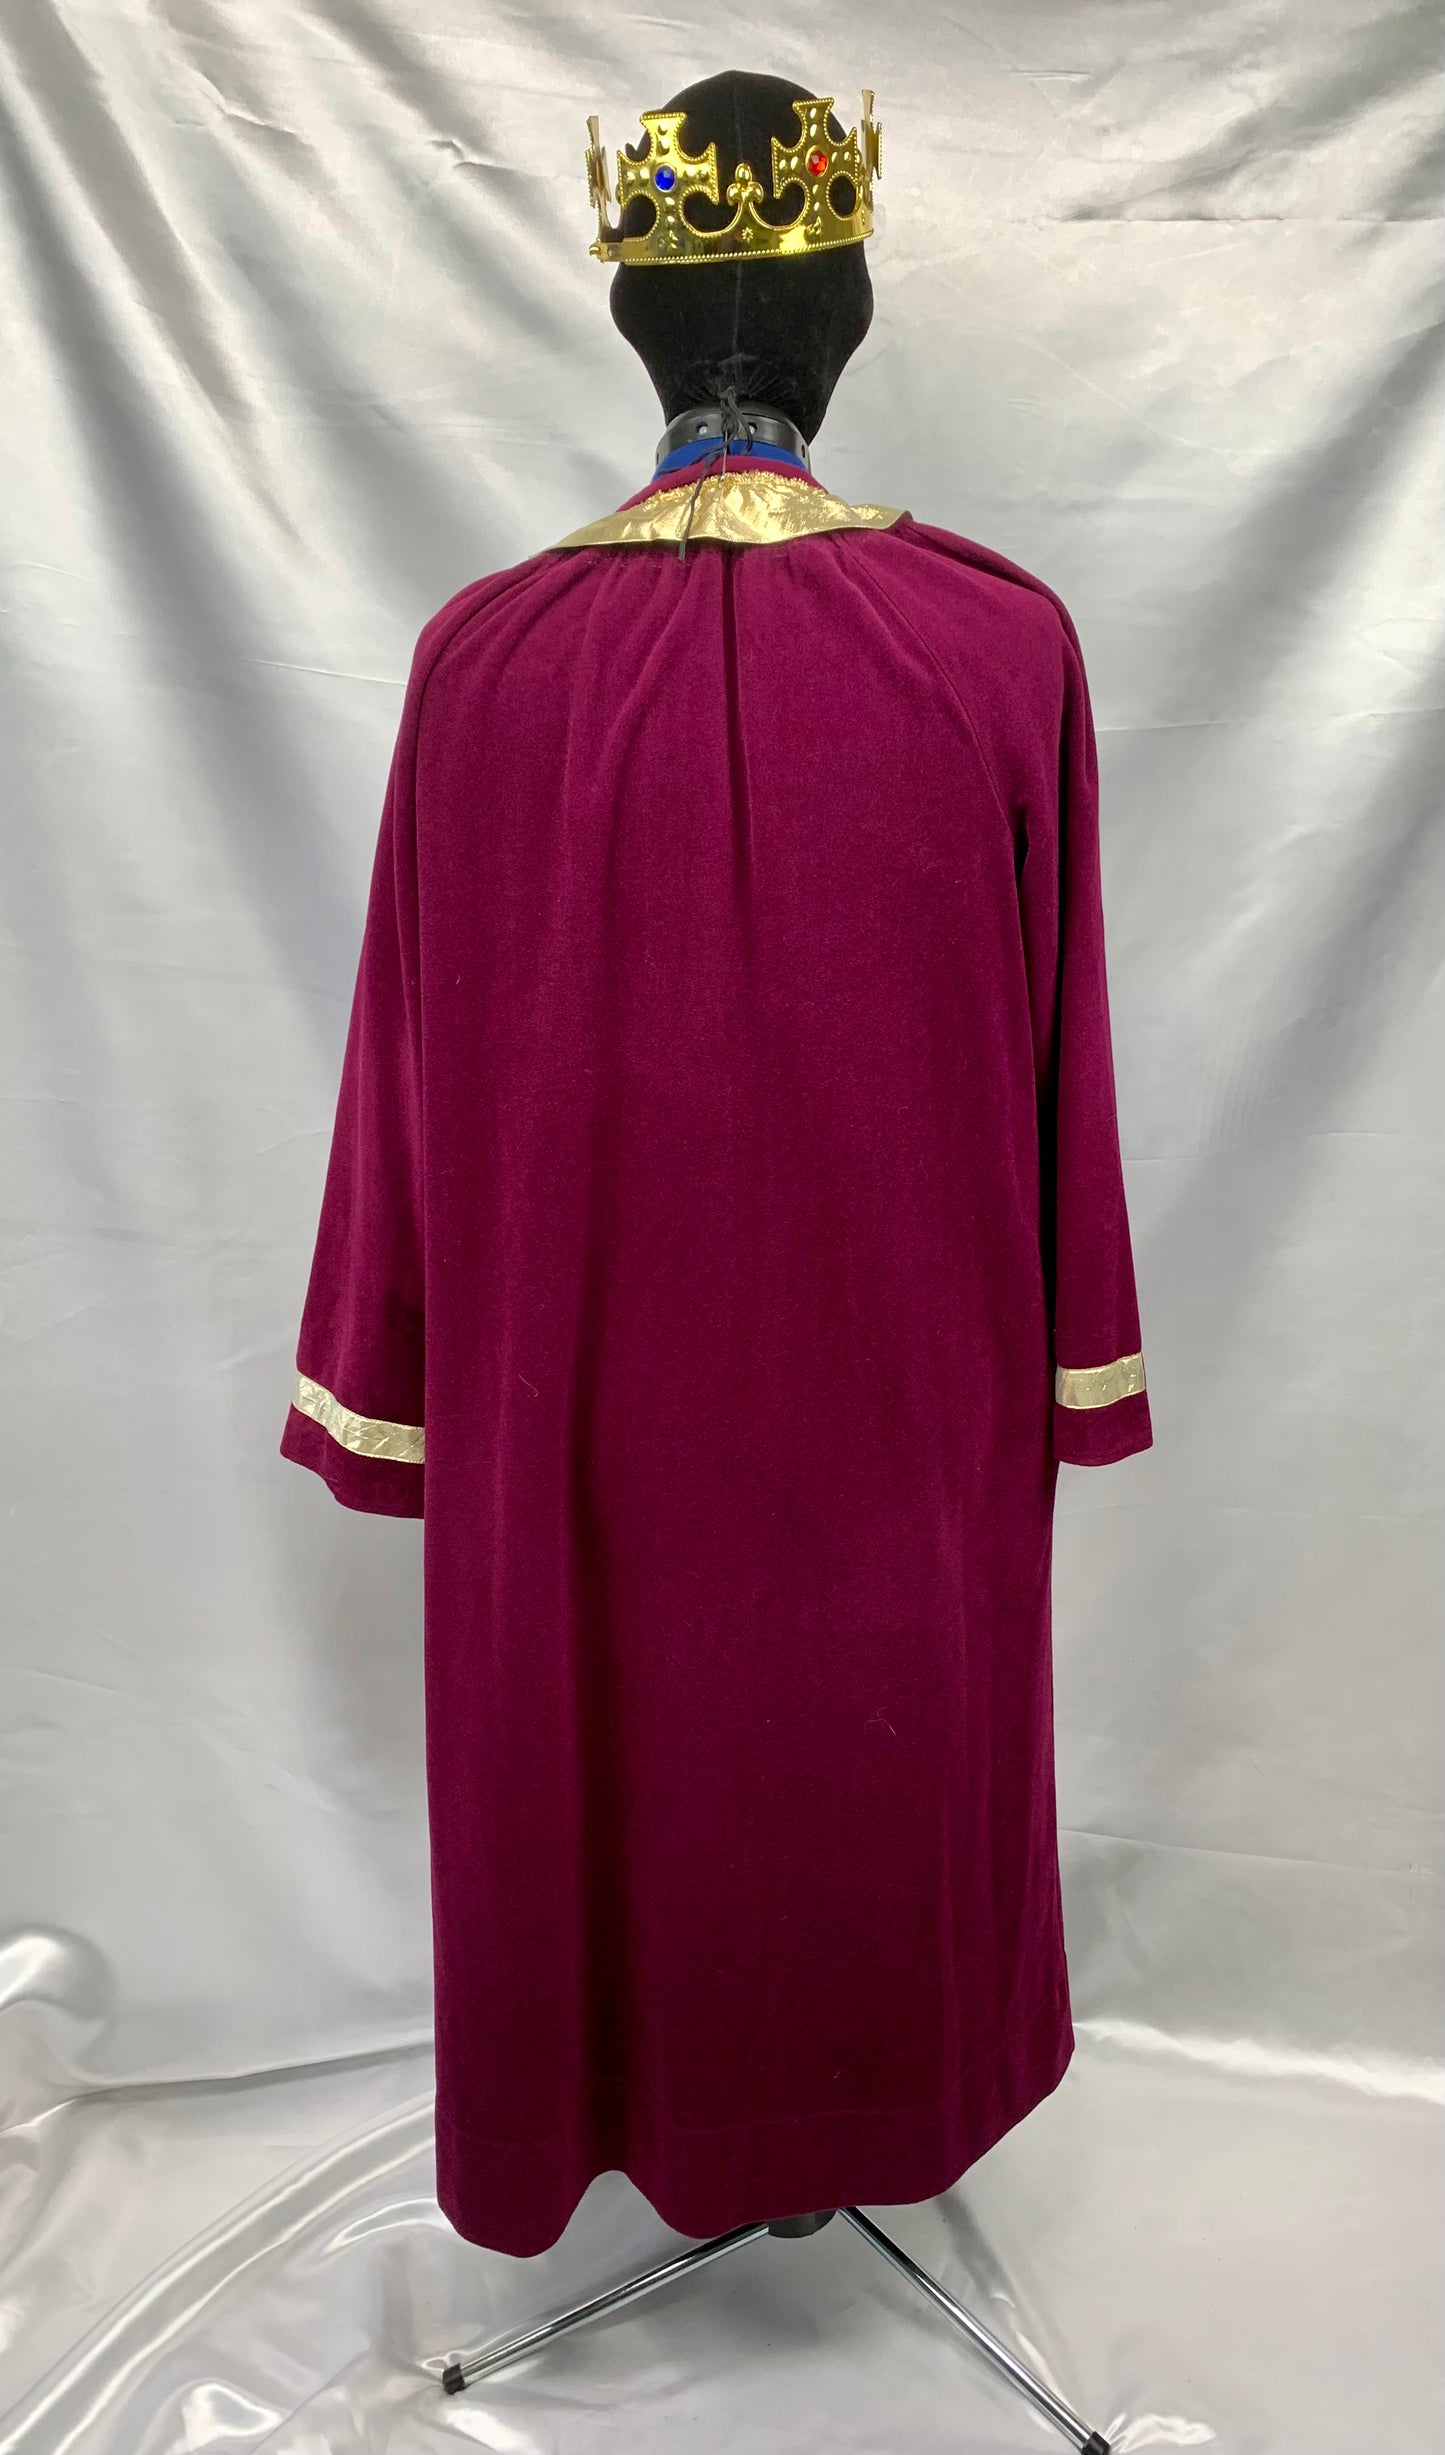 Burgundy Wizard/Jester King, Wiseman Gown - One Size Adult Costume